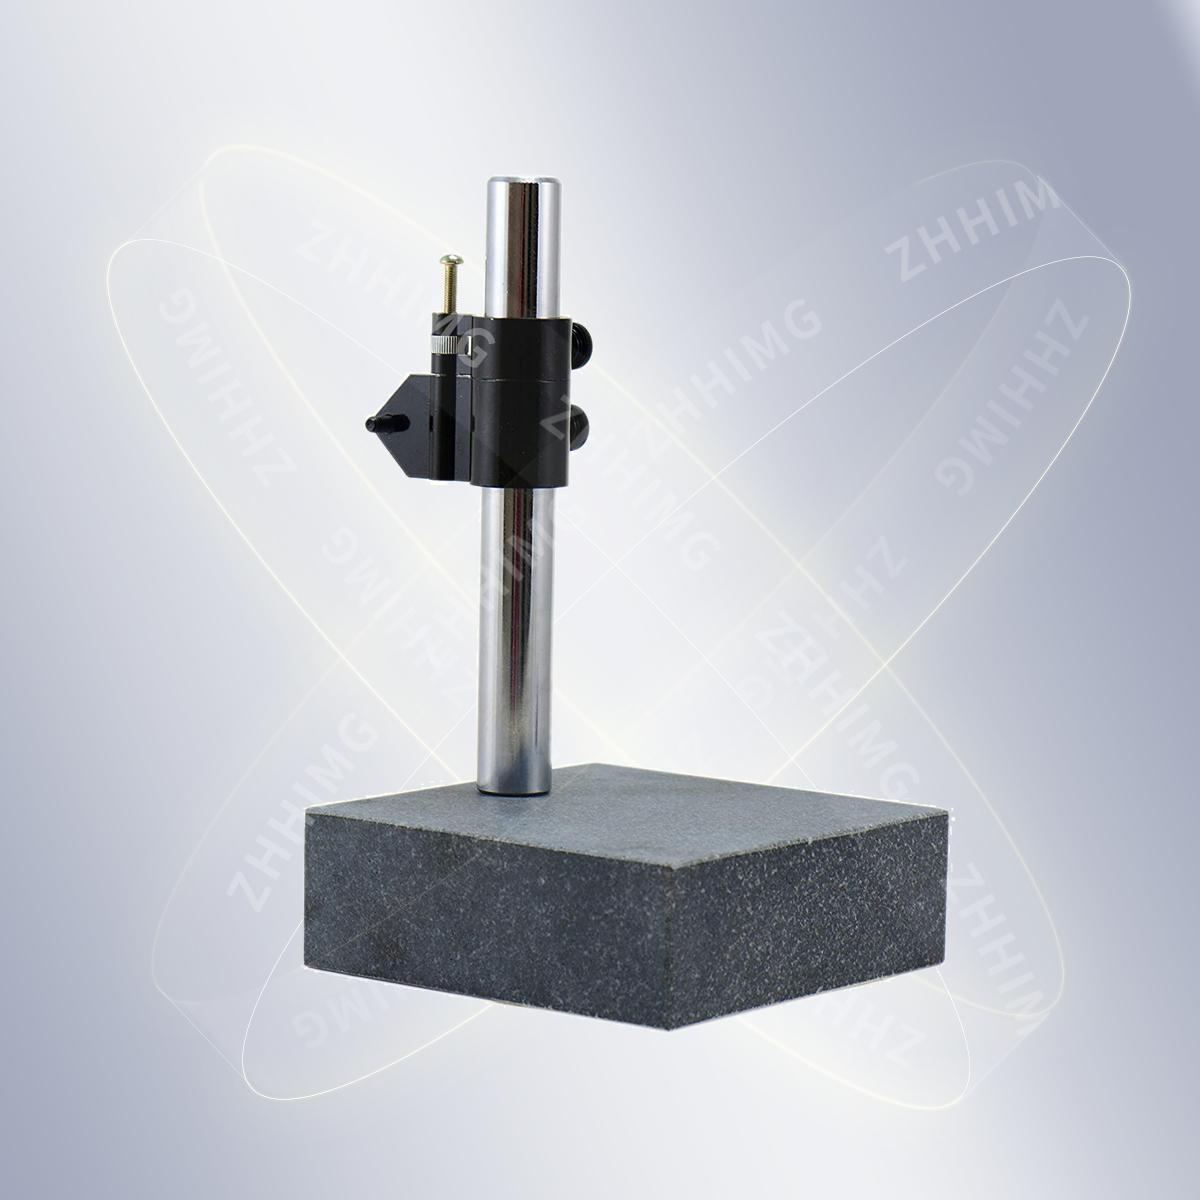 Best Price for Composite Constructions - Precision Granite Dial Base – ZHONGHUI